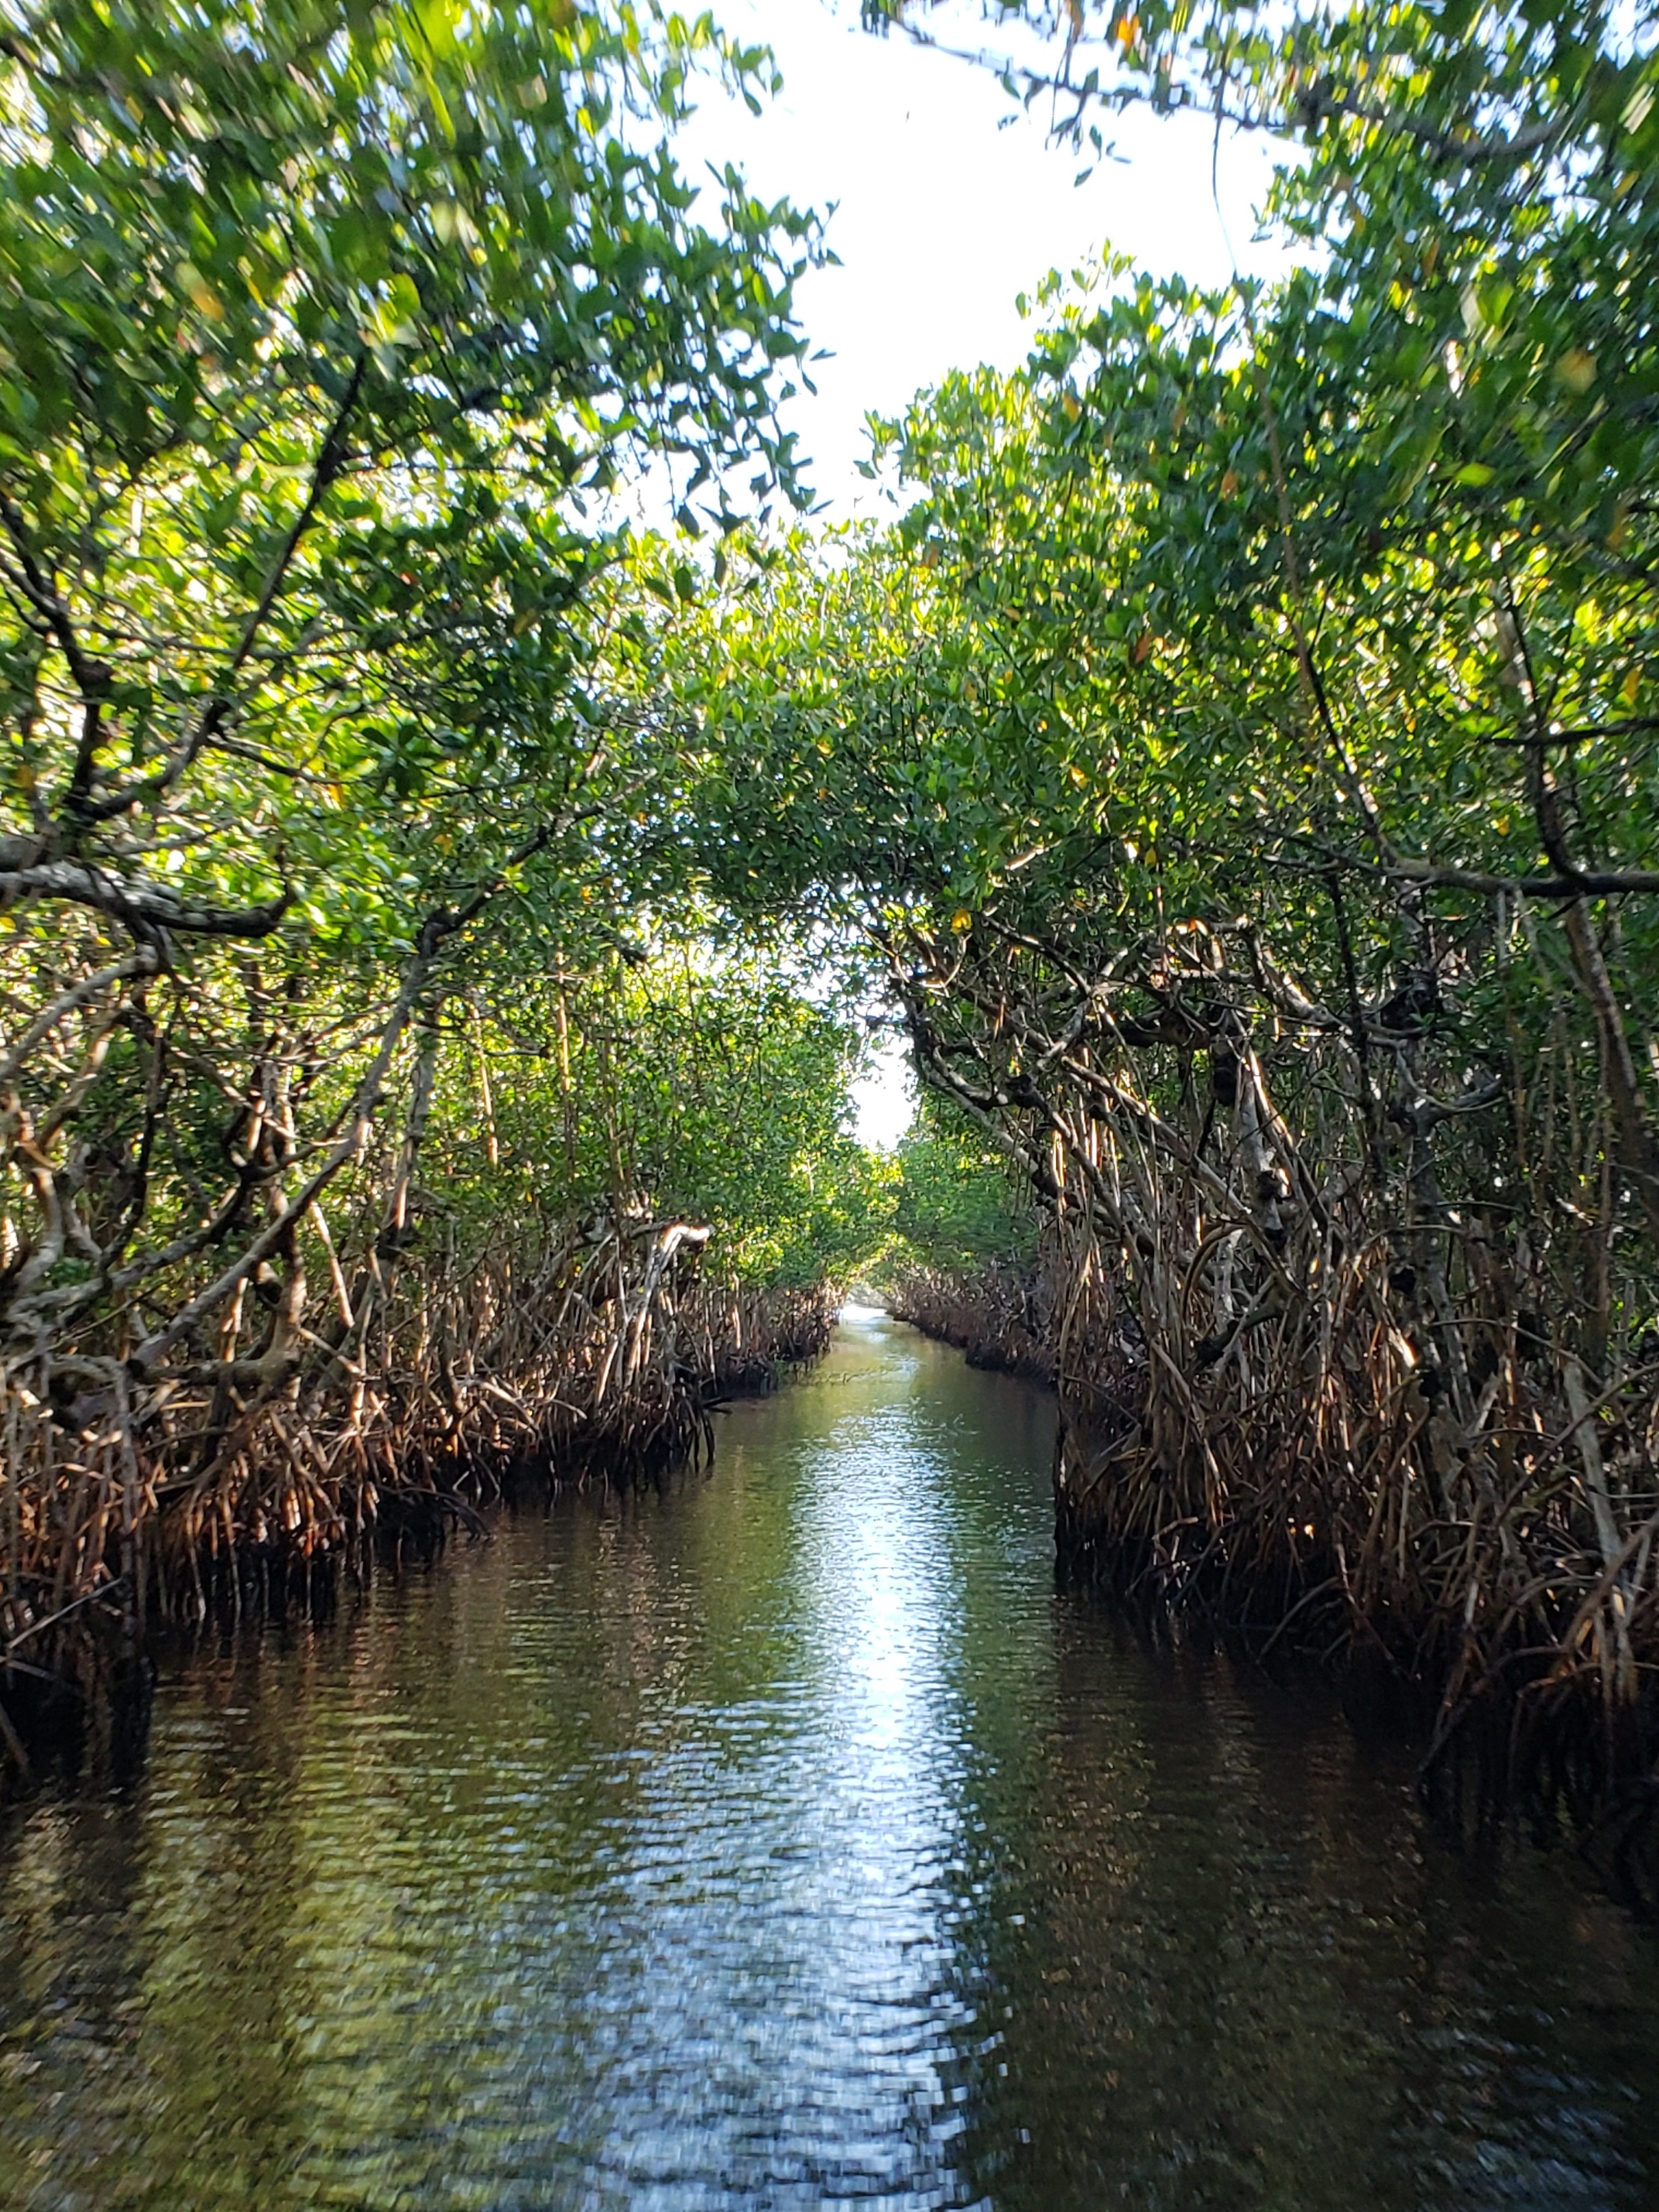 Now is a great time to visit the Everglades